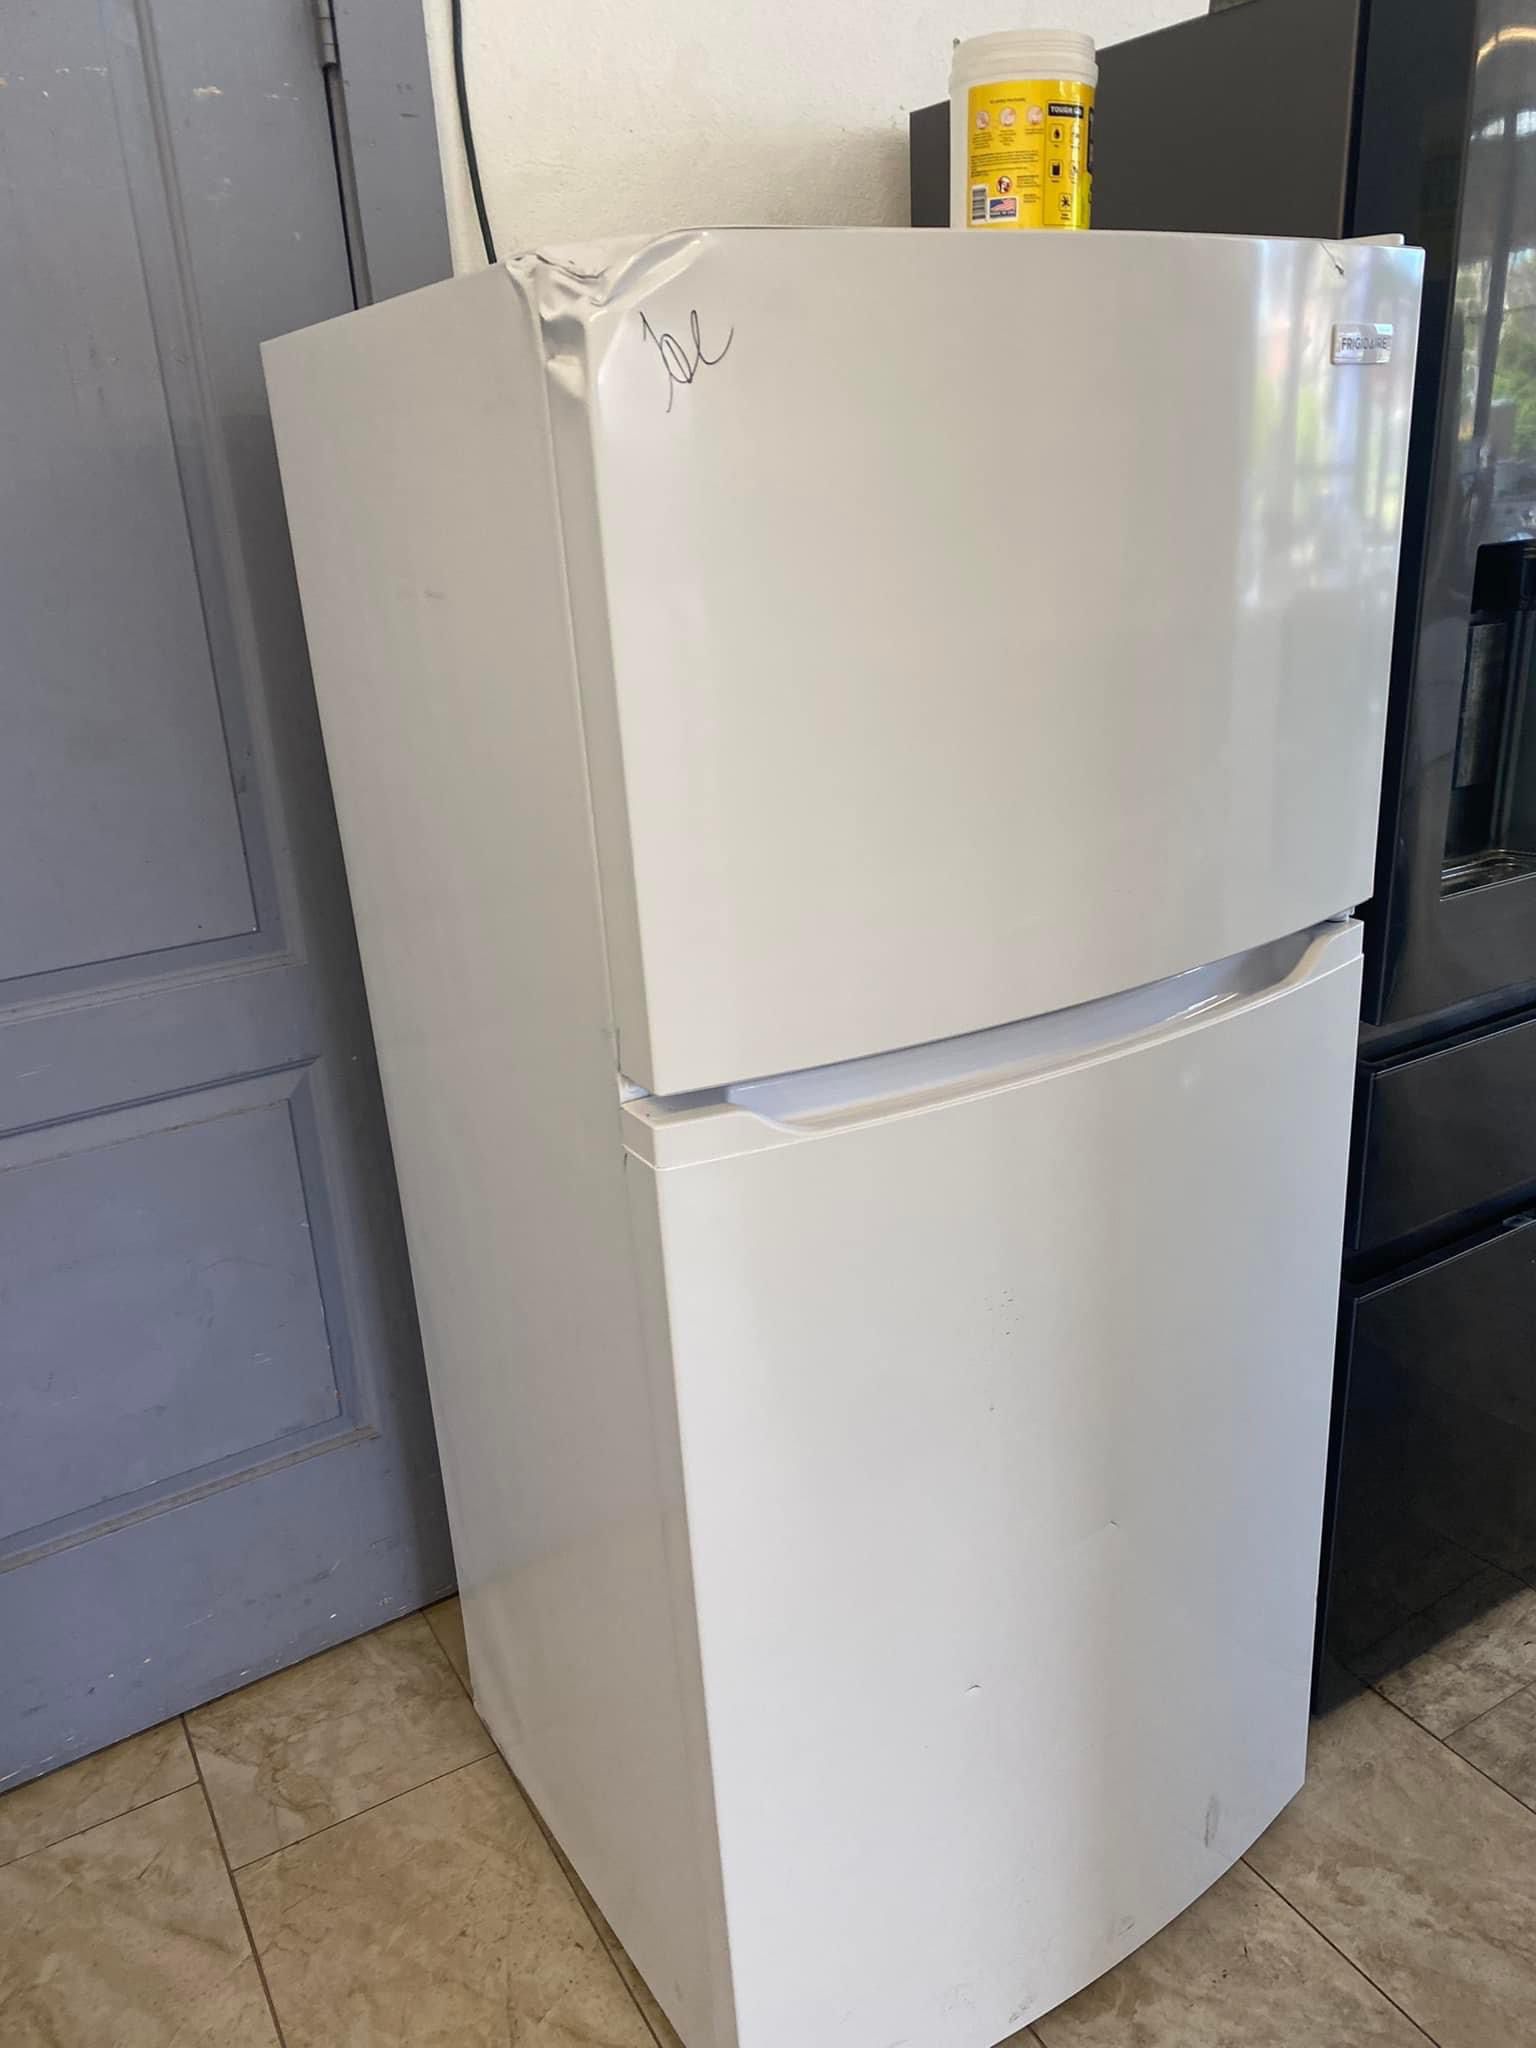 Scratch & dent refrigerator apartment size *Brand new out the box